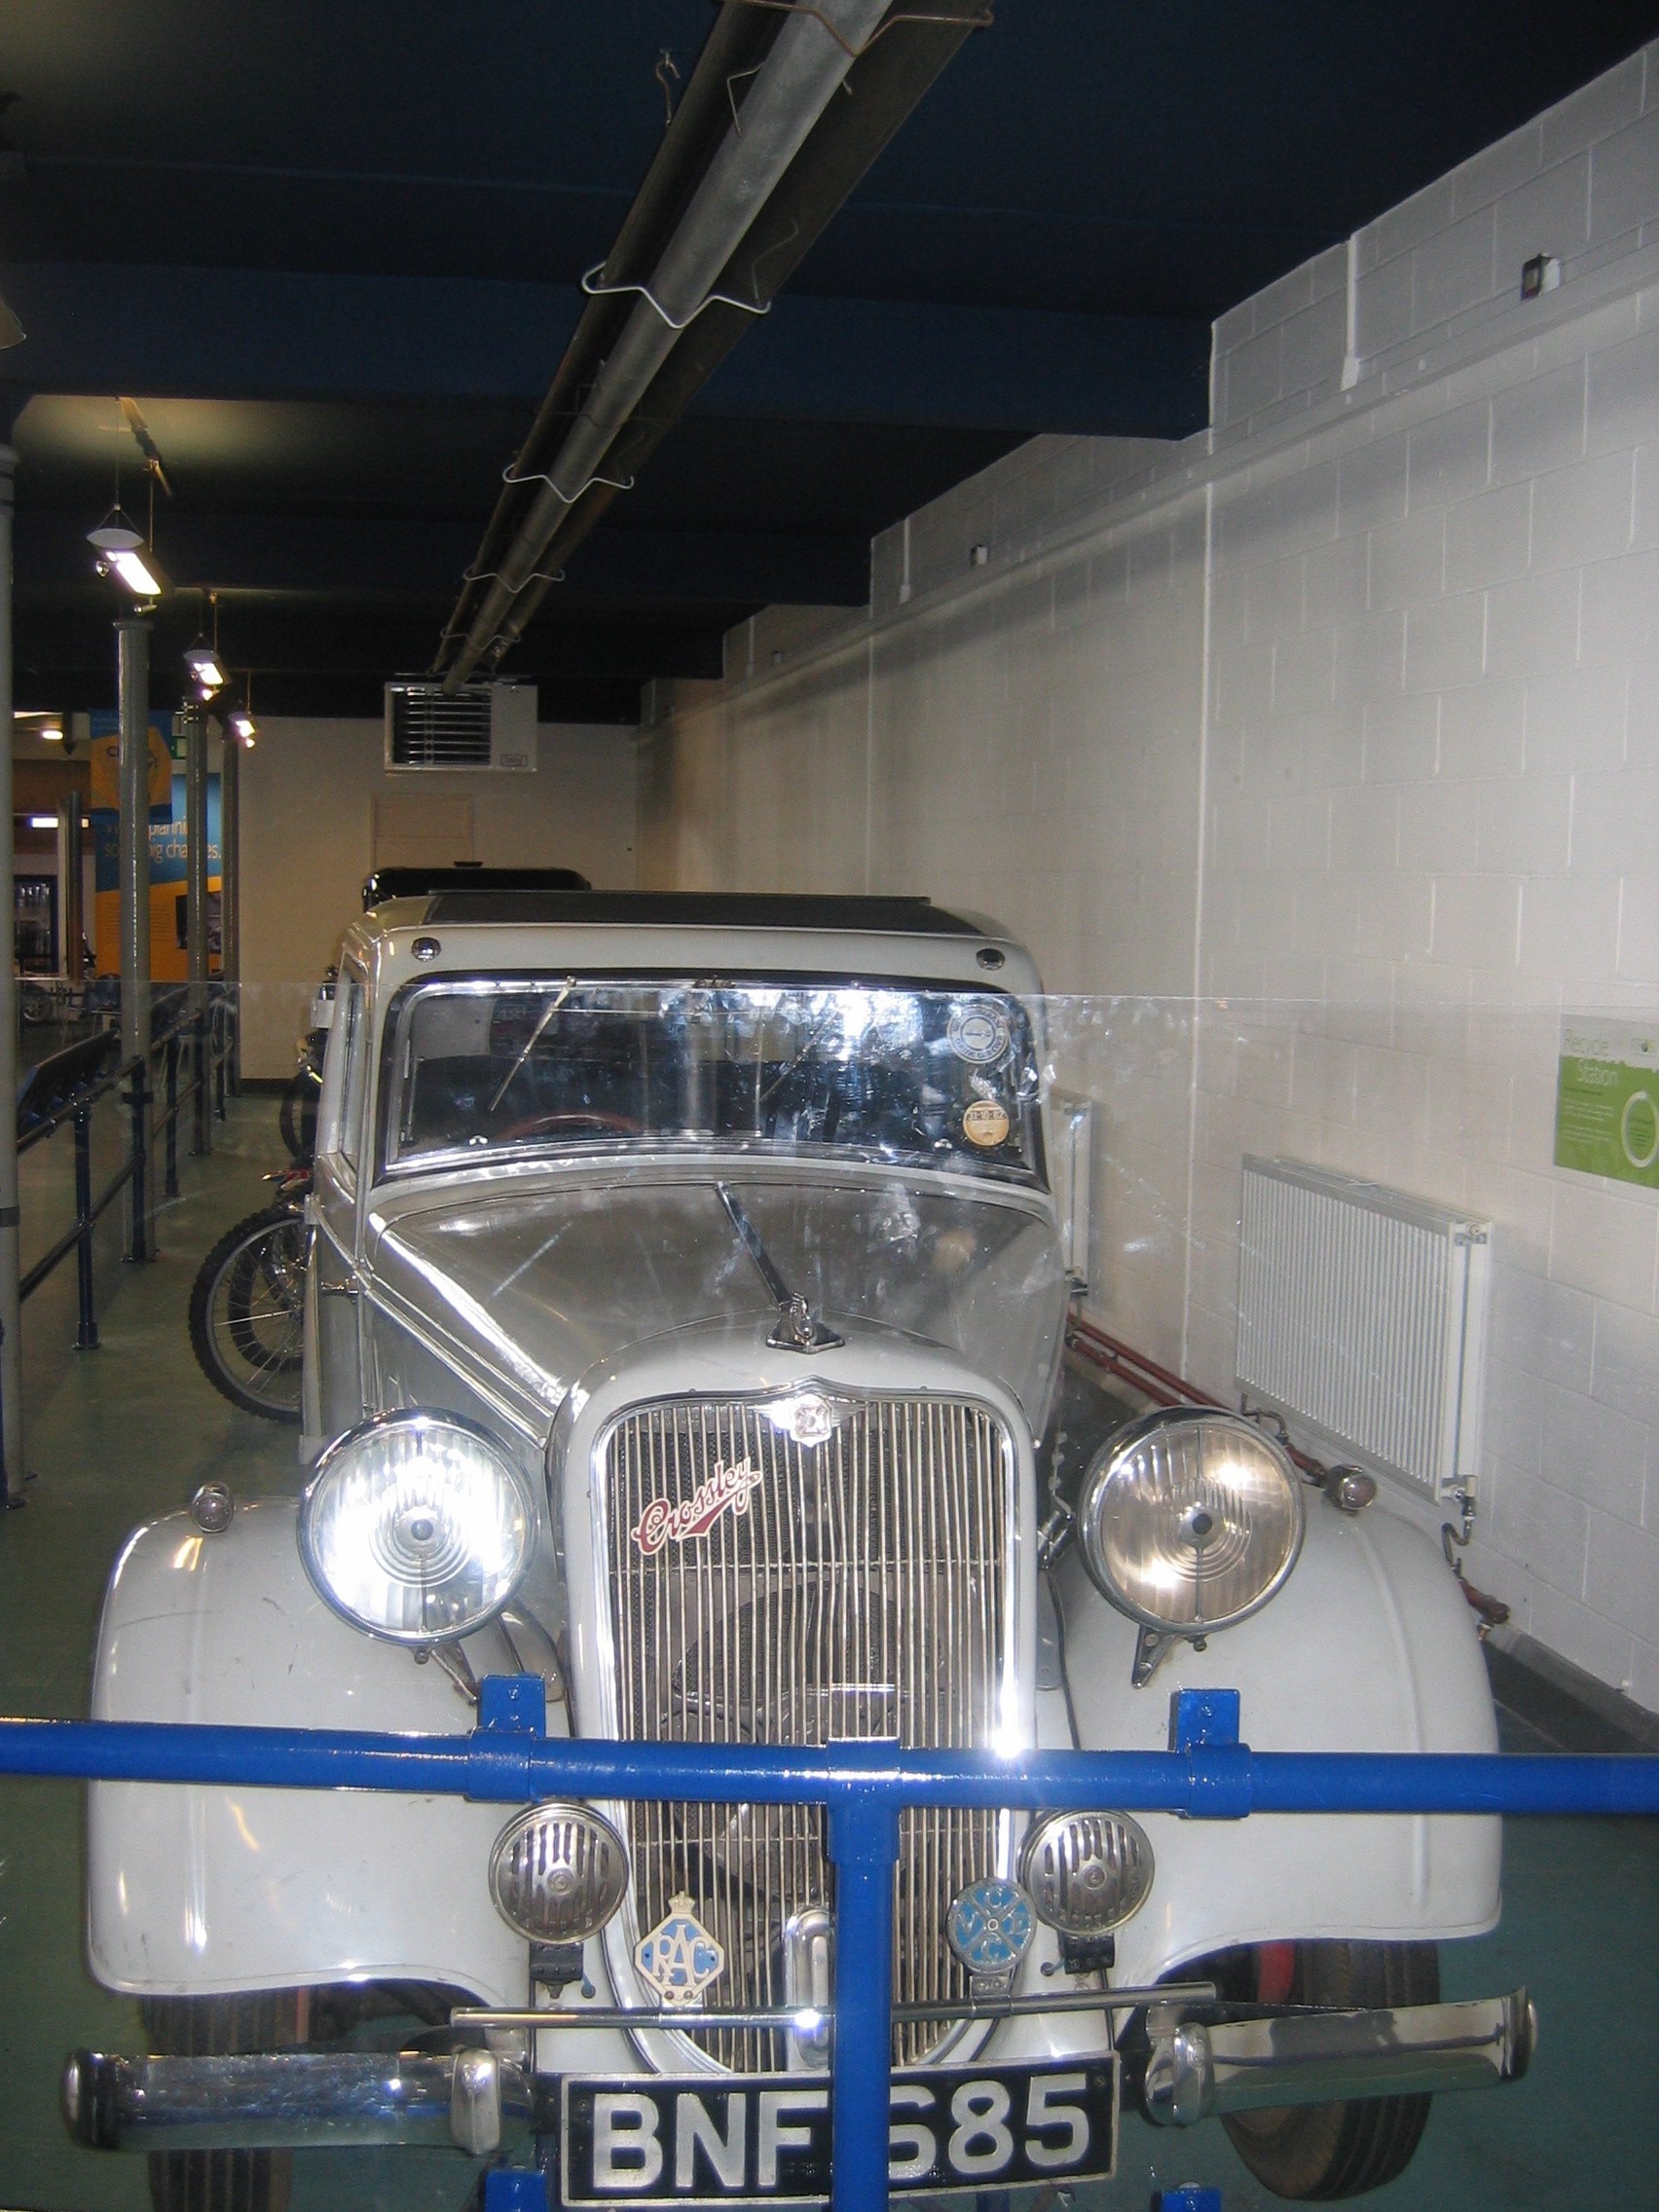 Photo taken by me – vintage car at Manchester’s Museum Of Science And Industry